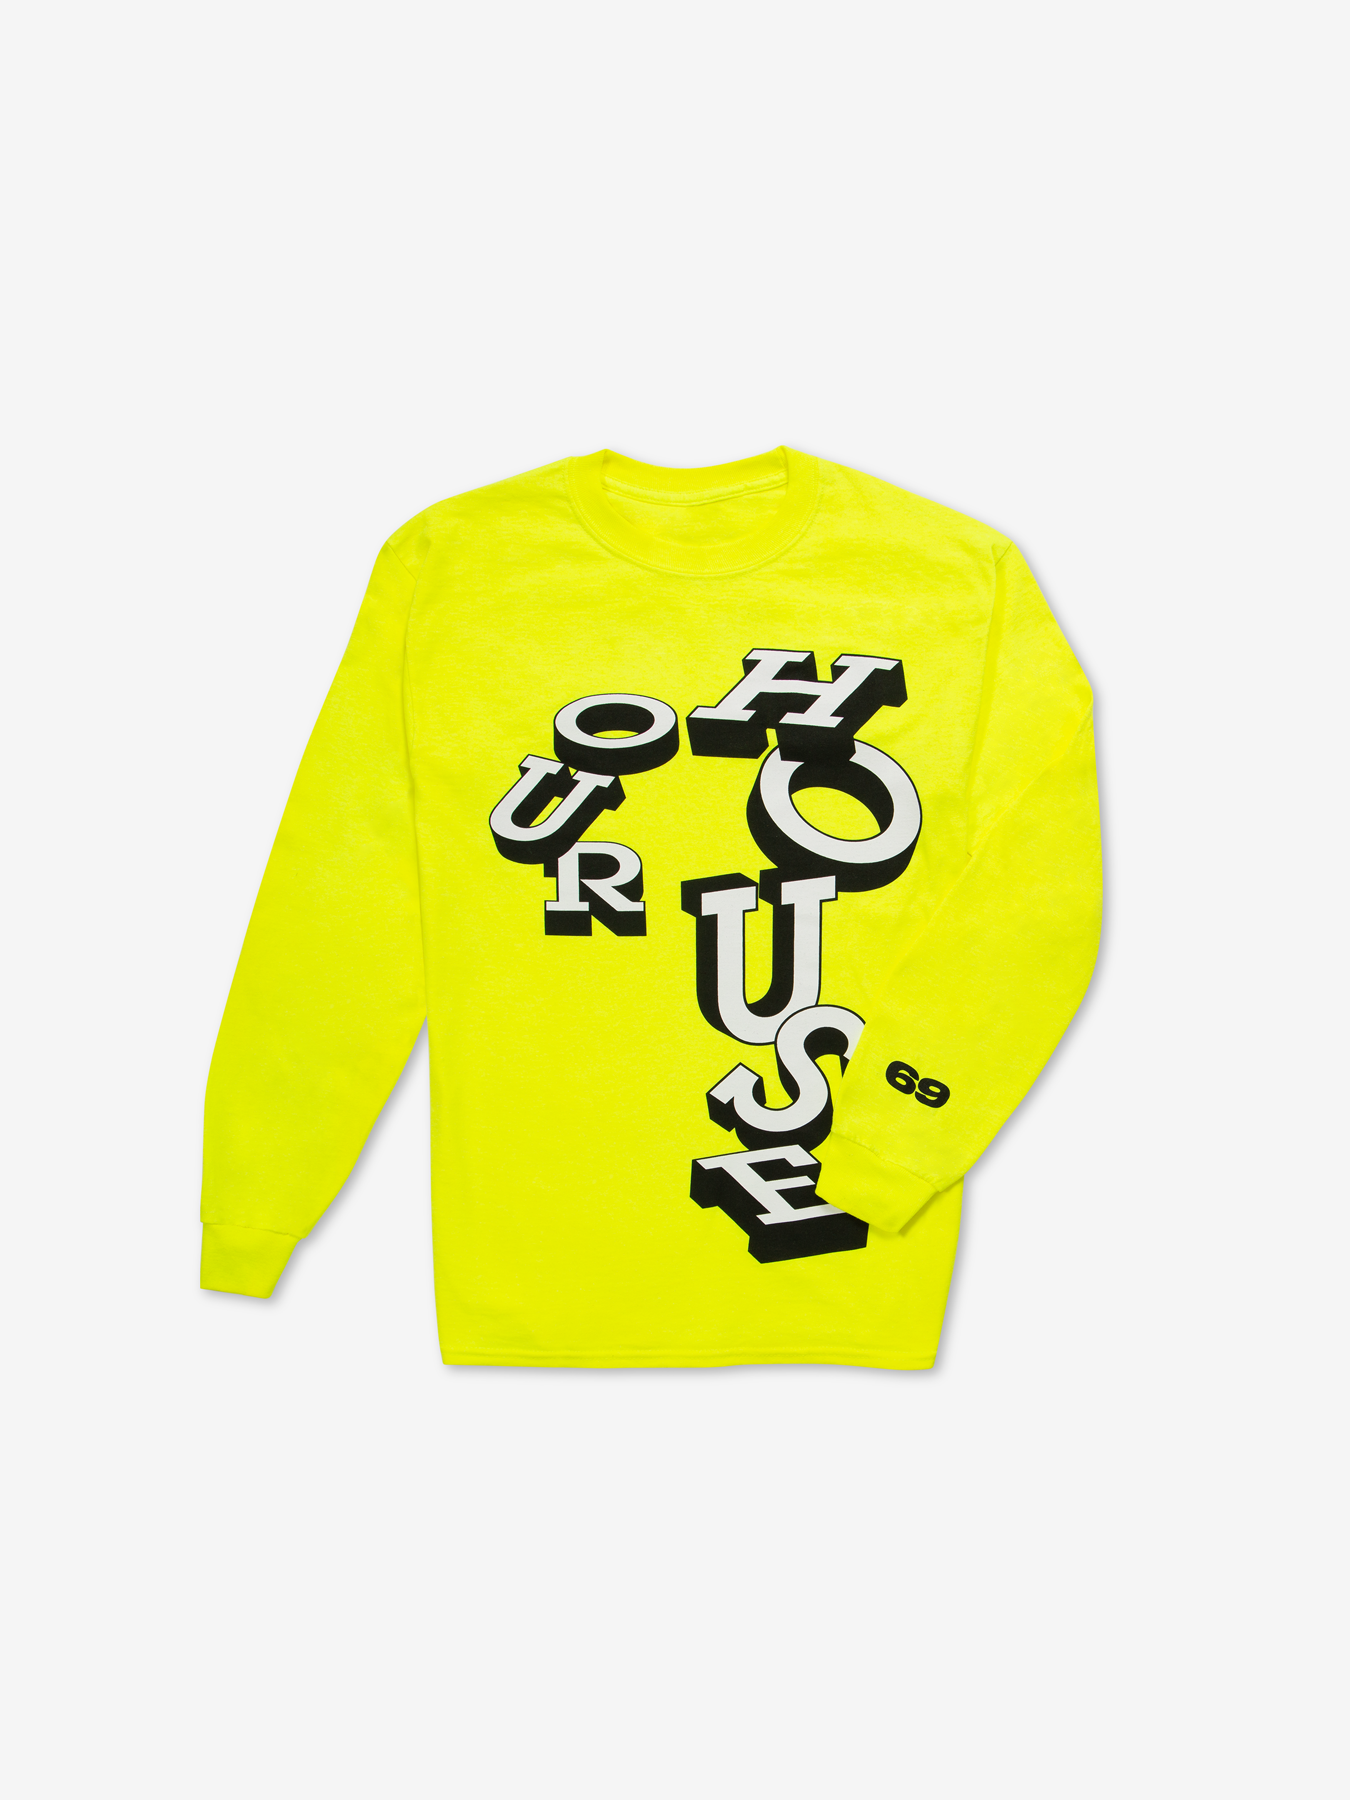 Chaos SixtyNine Neon Yellow 'Our House' Long Sleeved T-shirt